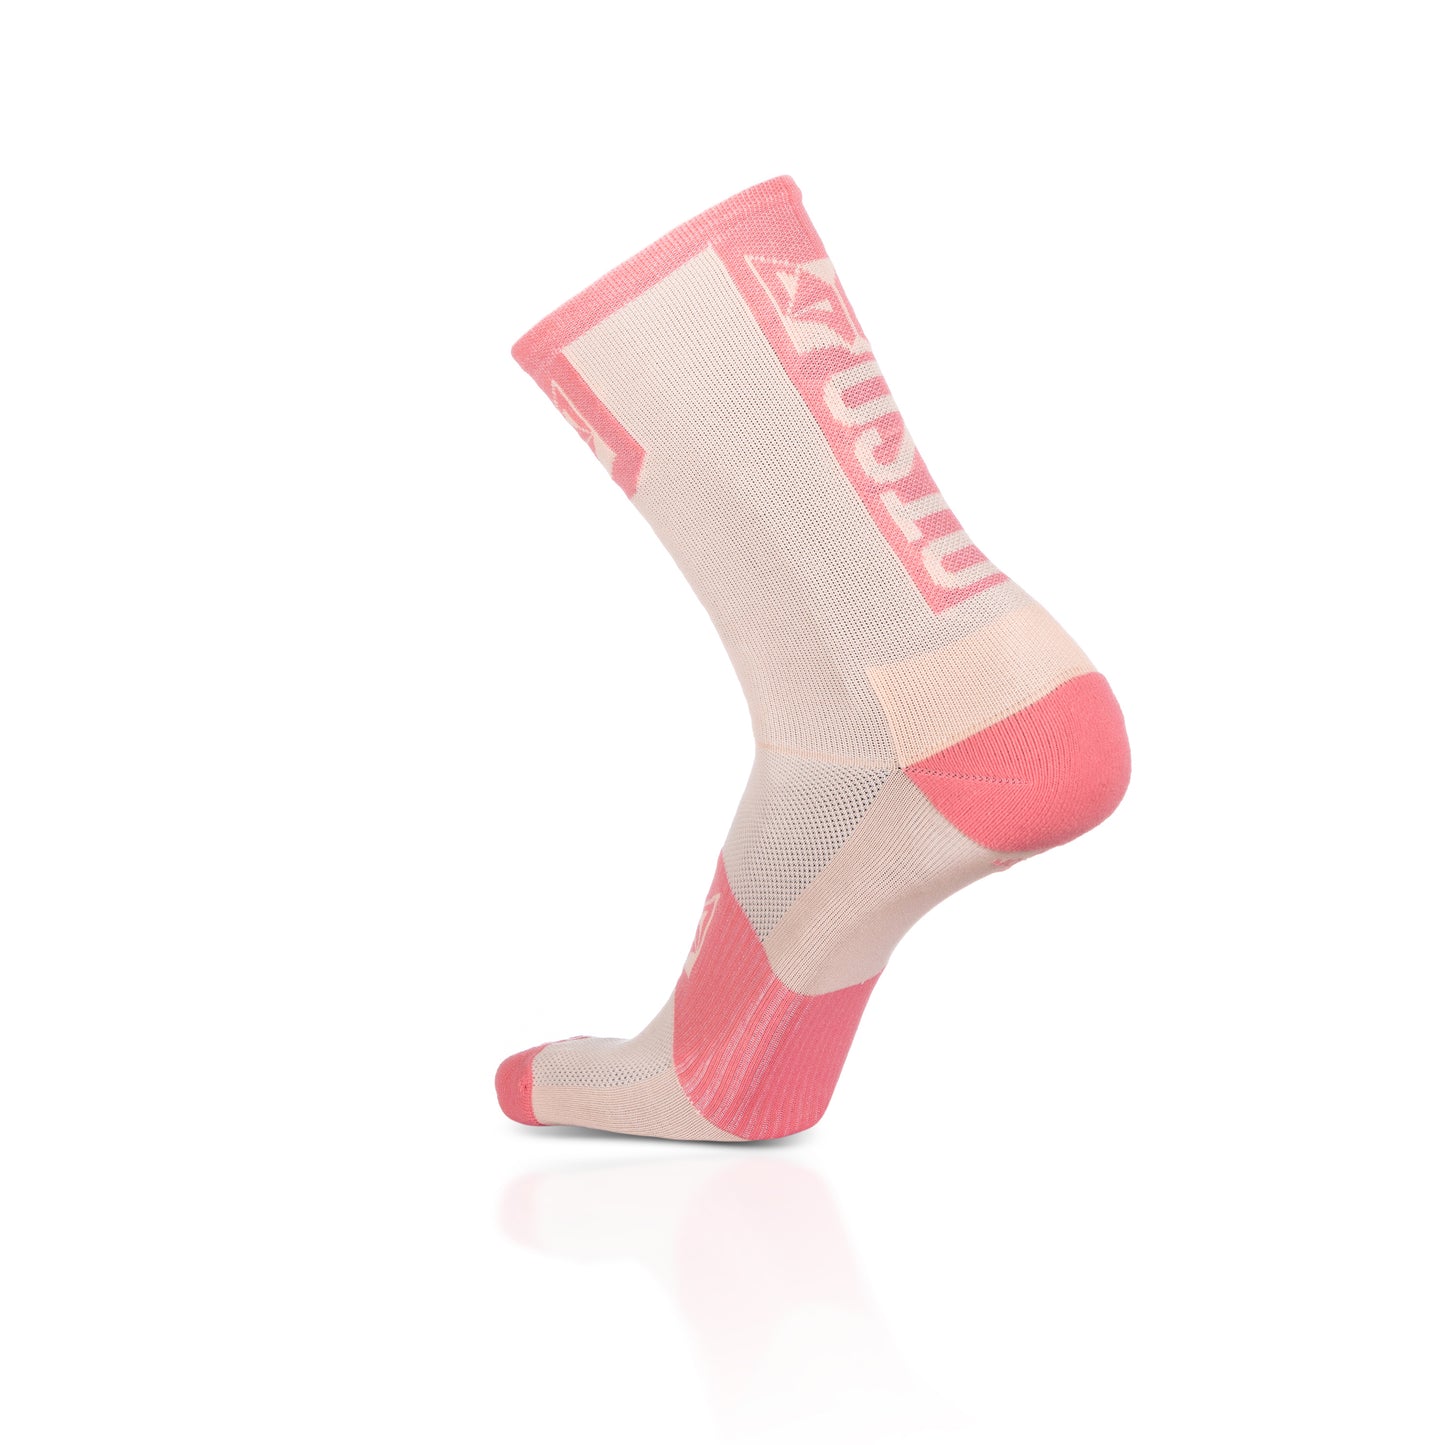 Calcetines de Ciclismo High Cut - Pink Coral & Pink Salmon (Outlet)